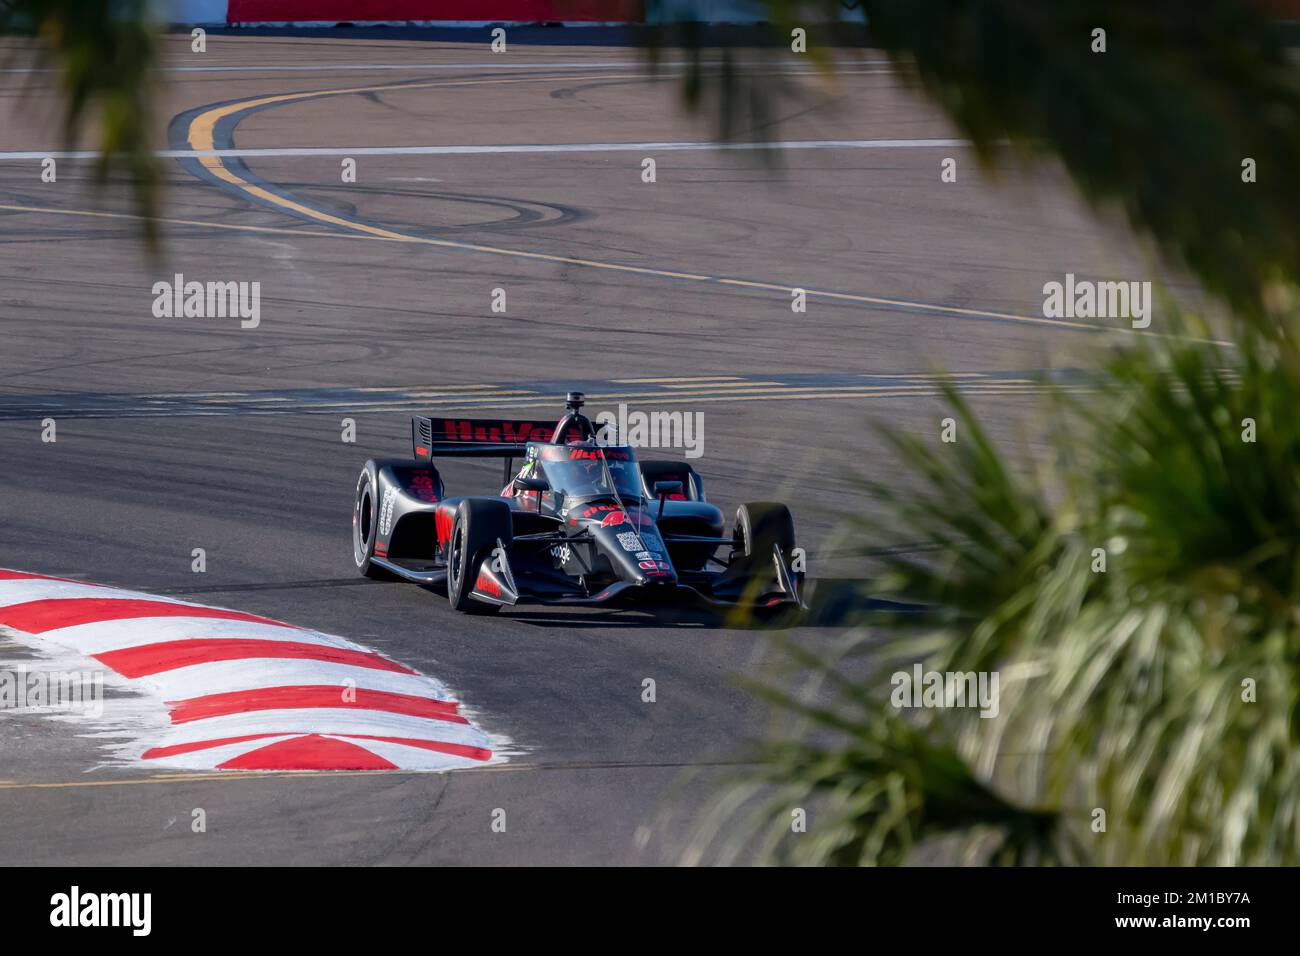 JACK HARVEY (45) of Bassingham, England practices for the Firestone Grand Prix of St Petersburg at the The Streets of St. Petersburg in St. Petersburg, Florida, USA. Stock Photo